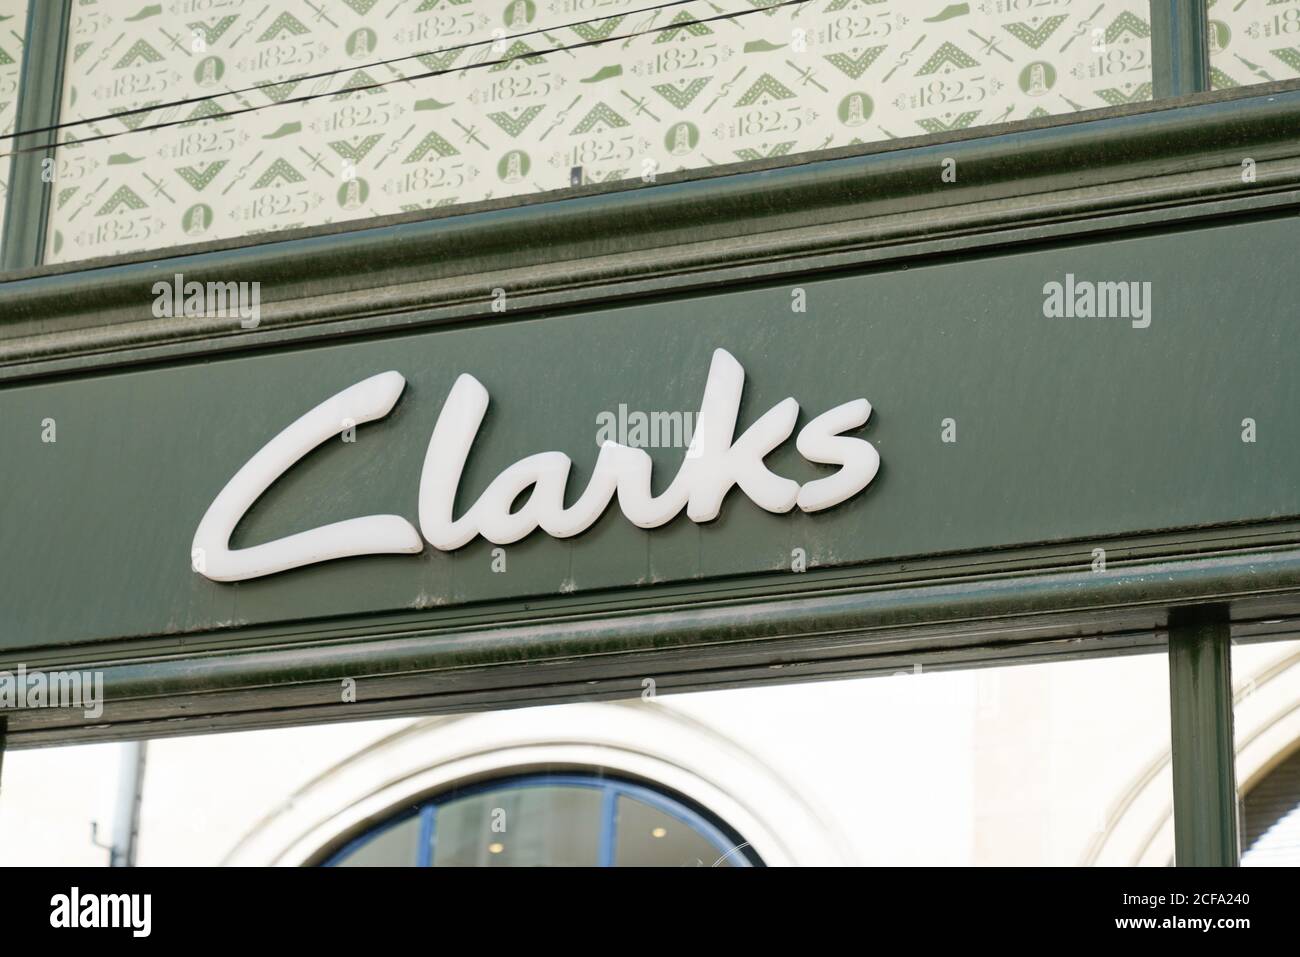 Bordeaux , Aquitaine / France 08 08 2020 : Clarks logo sign front Store shoes of international shoe manufacturer in Somerset uk England Stock Photo - Alamy